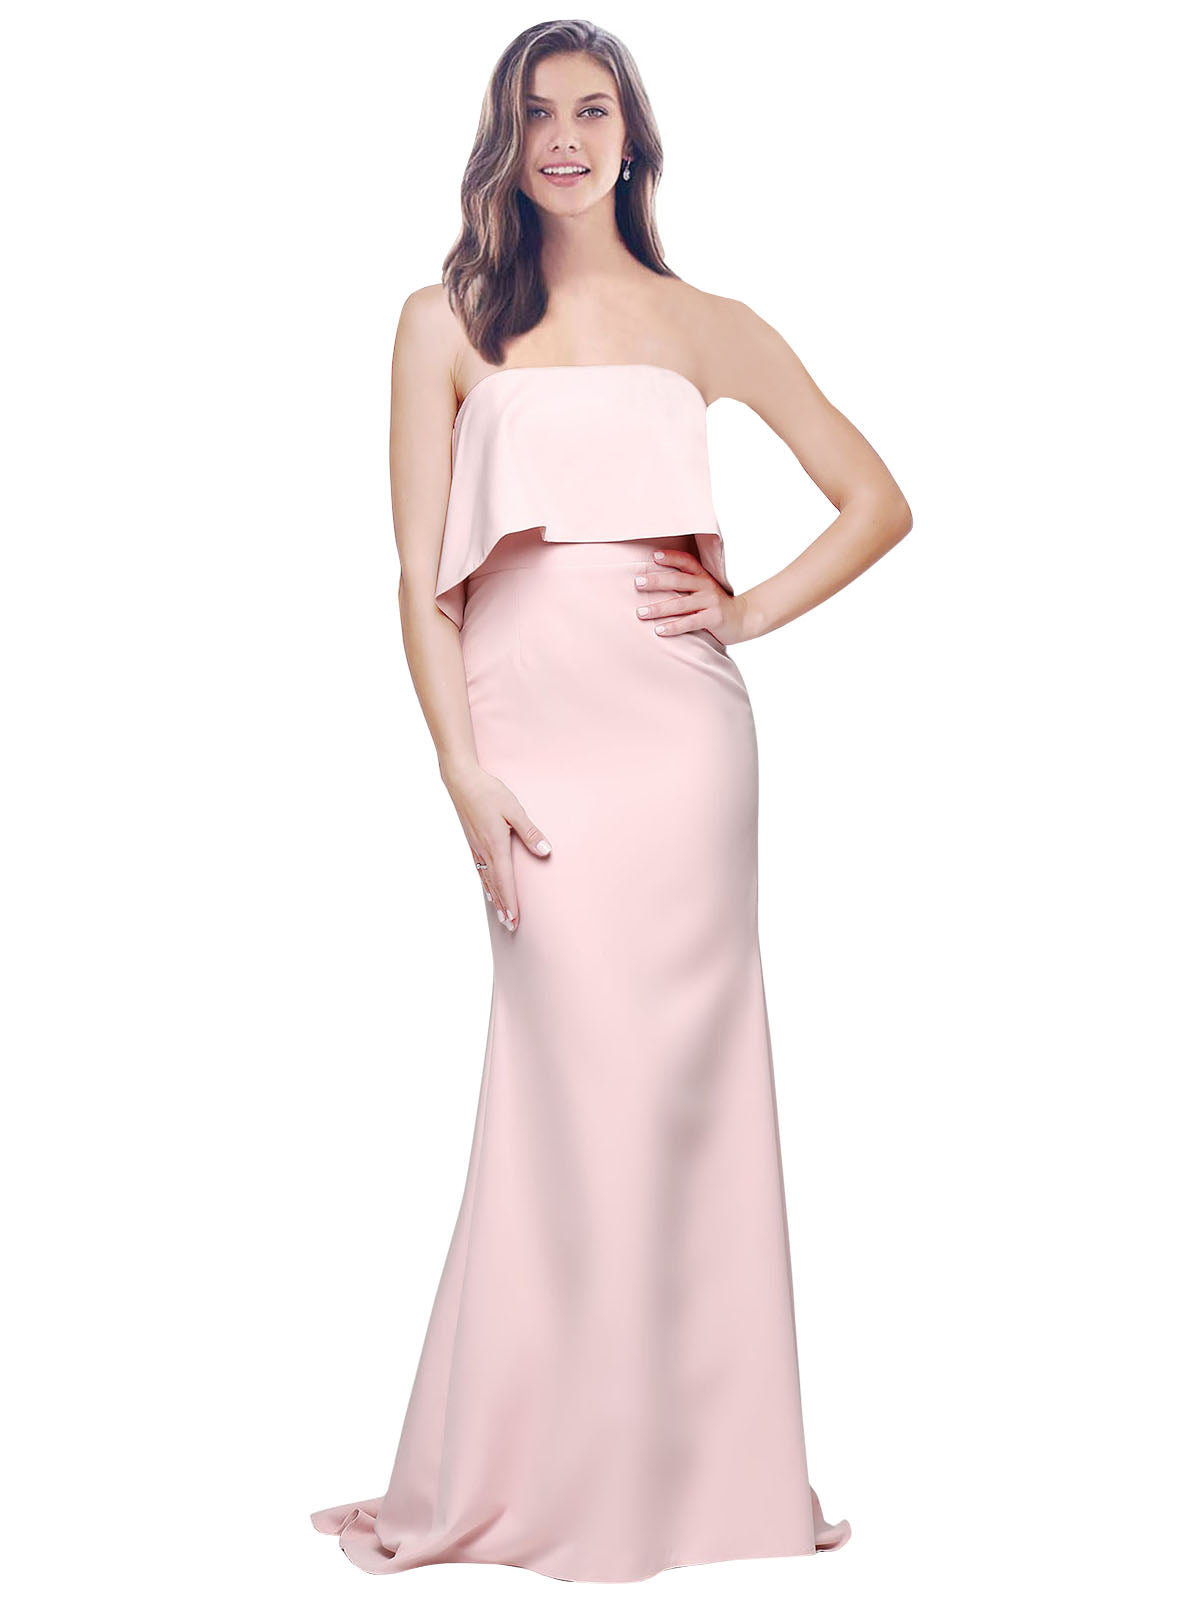 RightBrides Mark Long A-Line Strapless Floor Length Sleeveless Pink Stretch Crepe Bridesmaid Dress